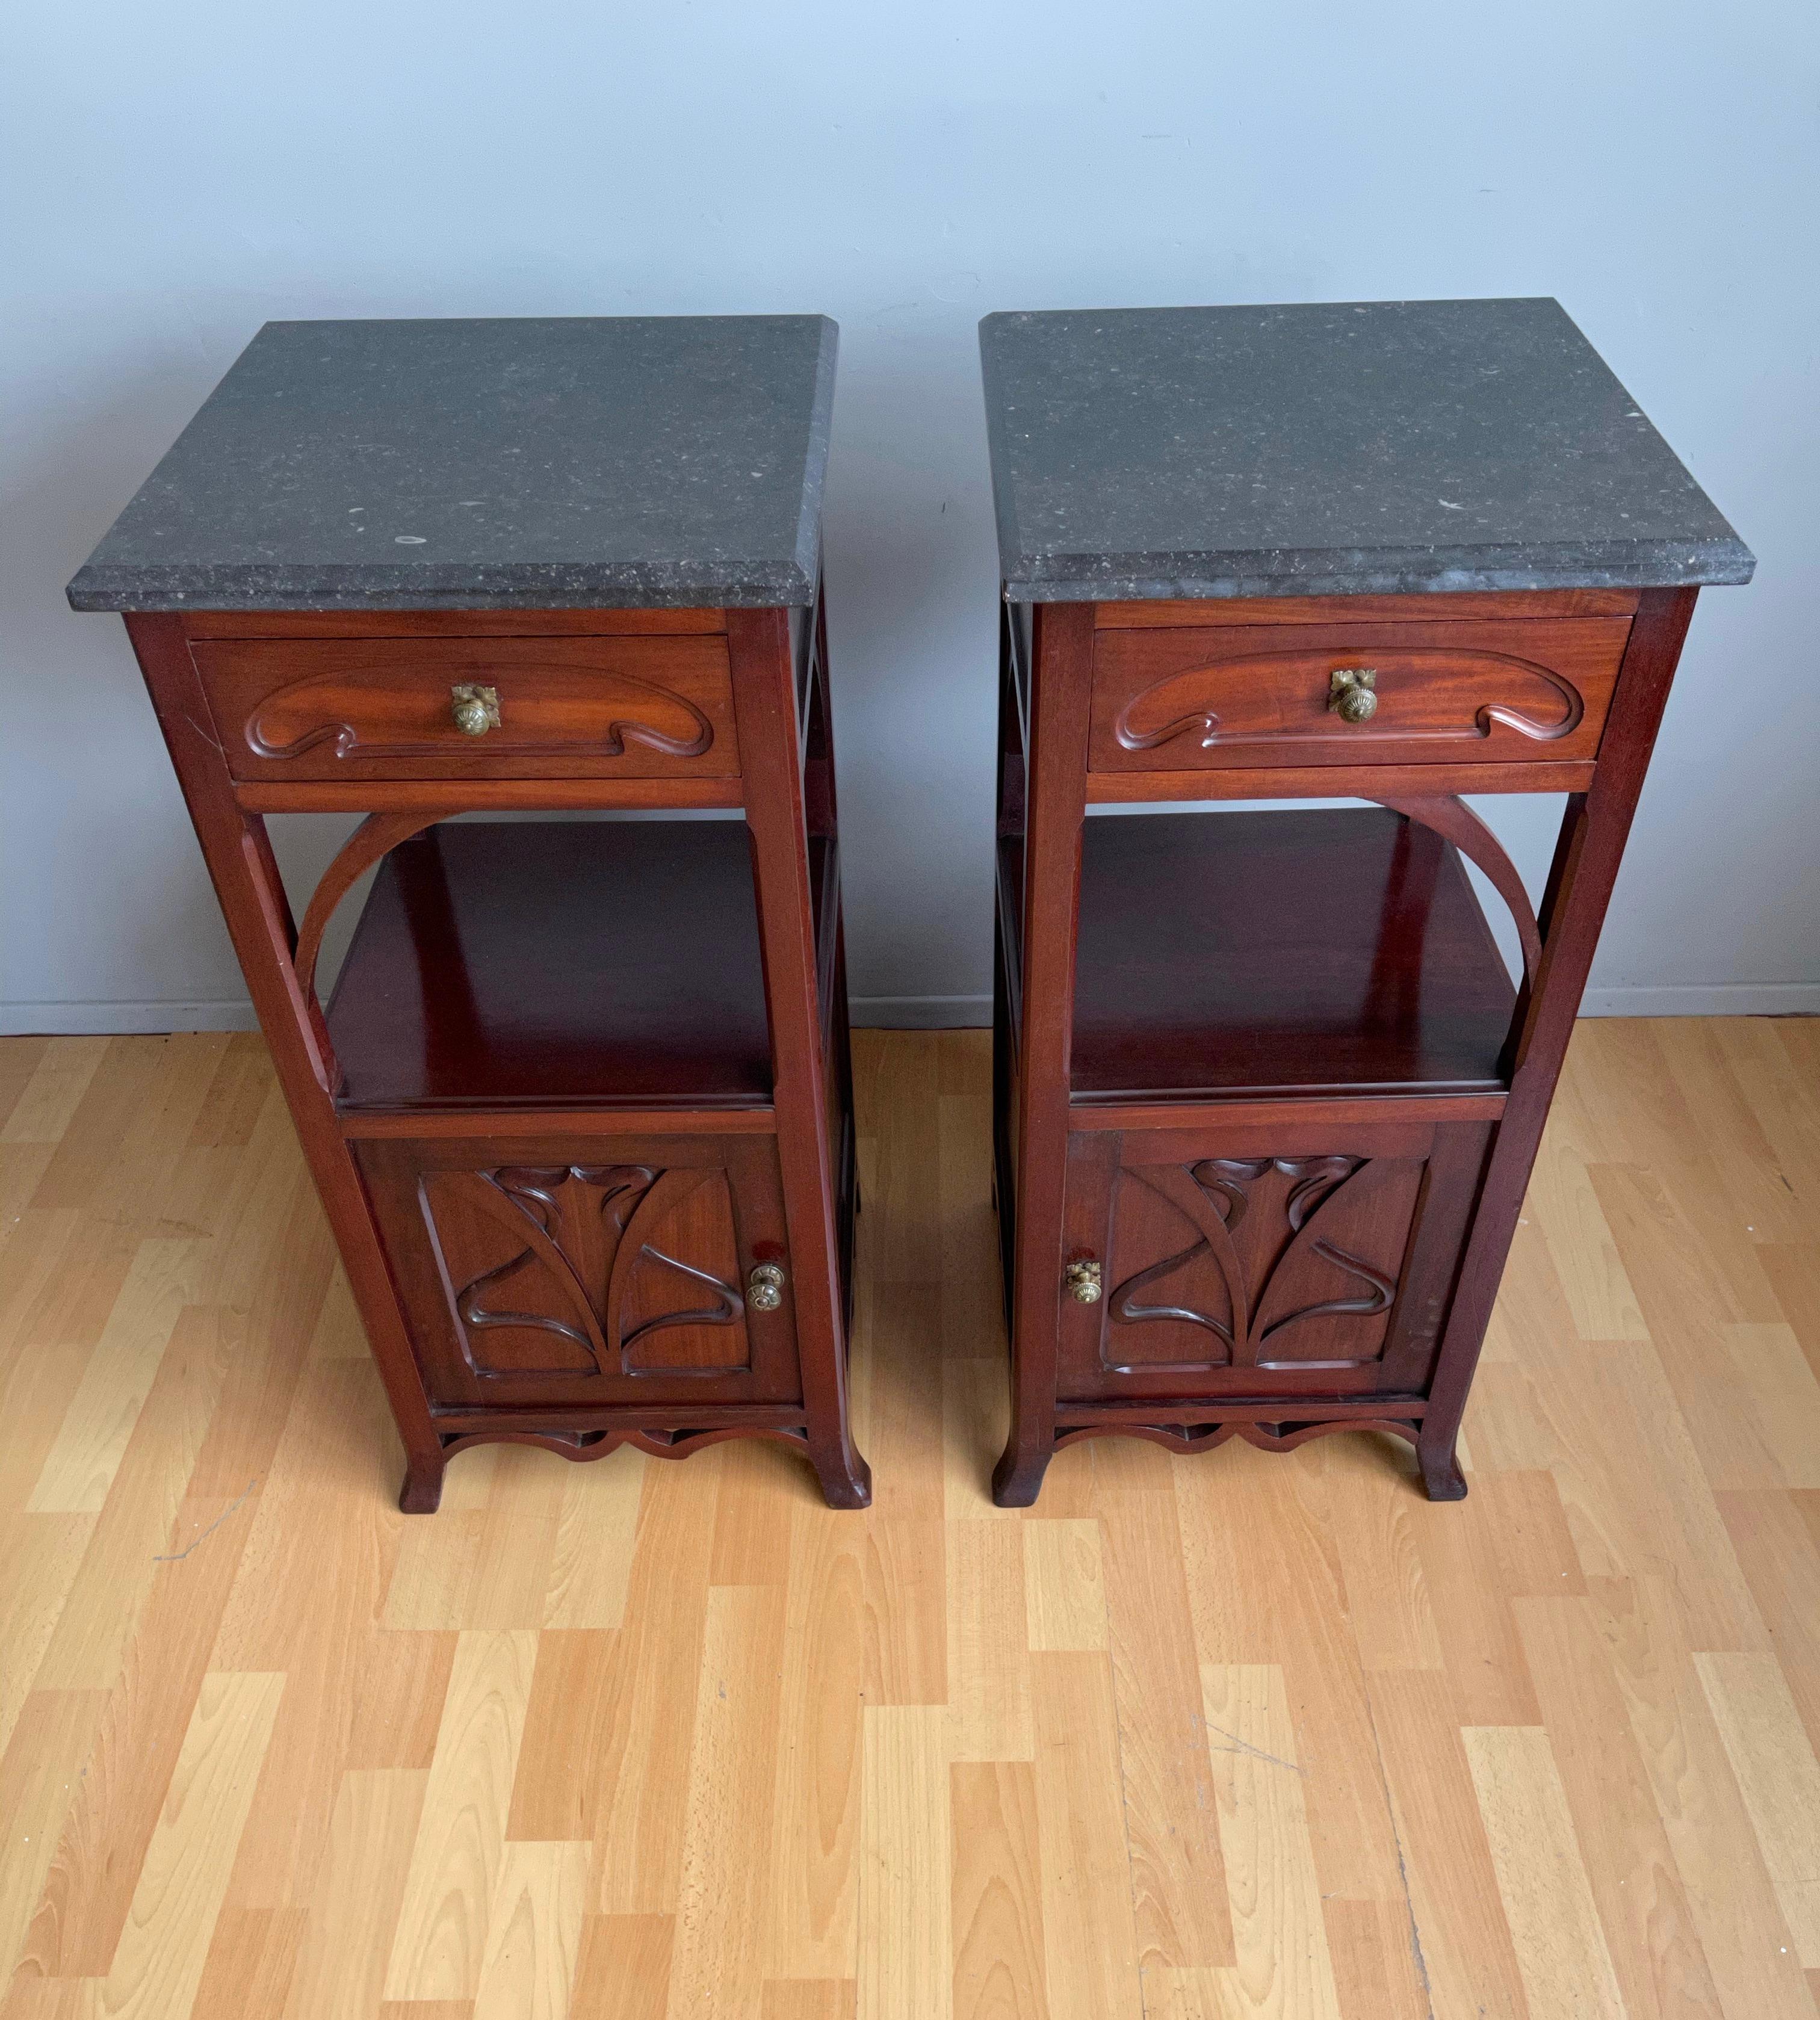 Brass Pair of Solid Wooden Art Nouveau Bedside Cabinets / Nightstands with Marble Top